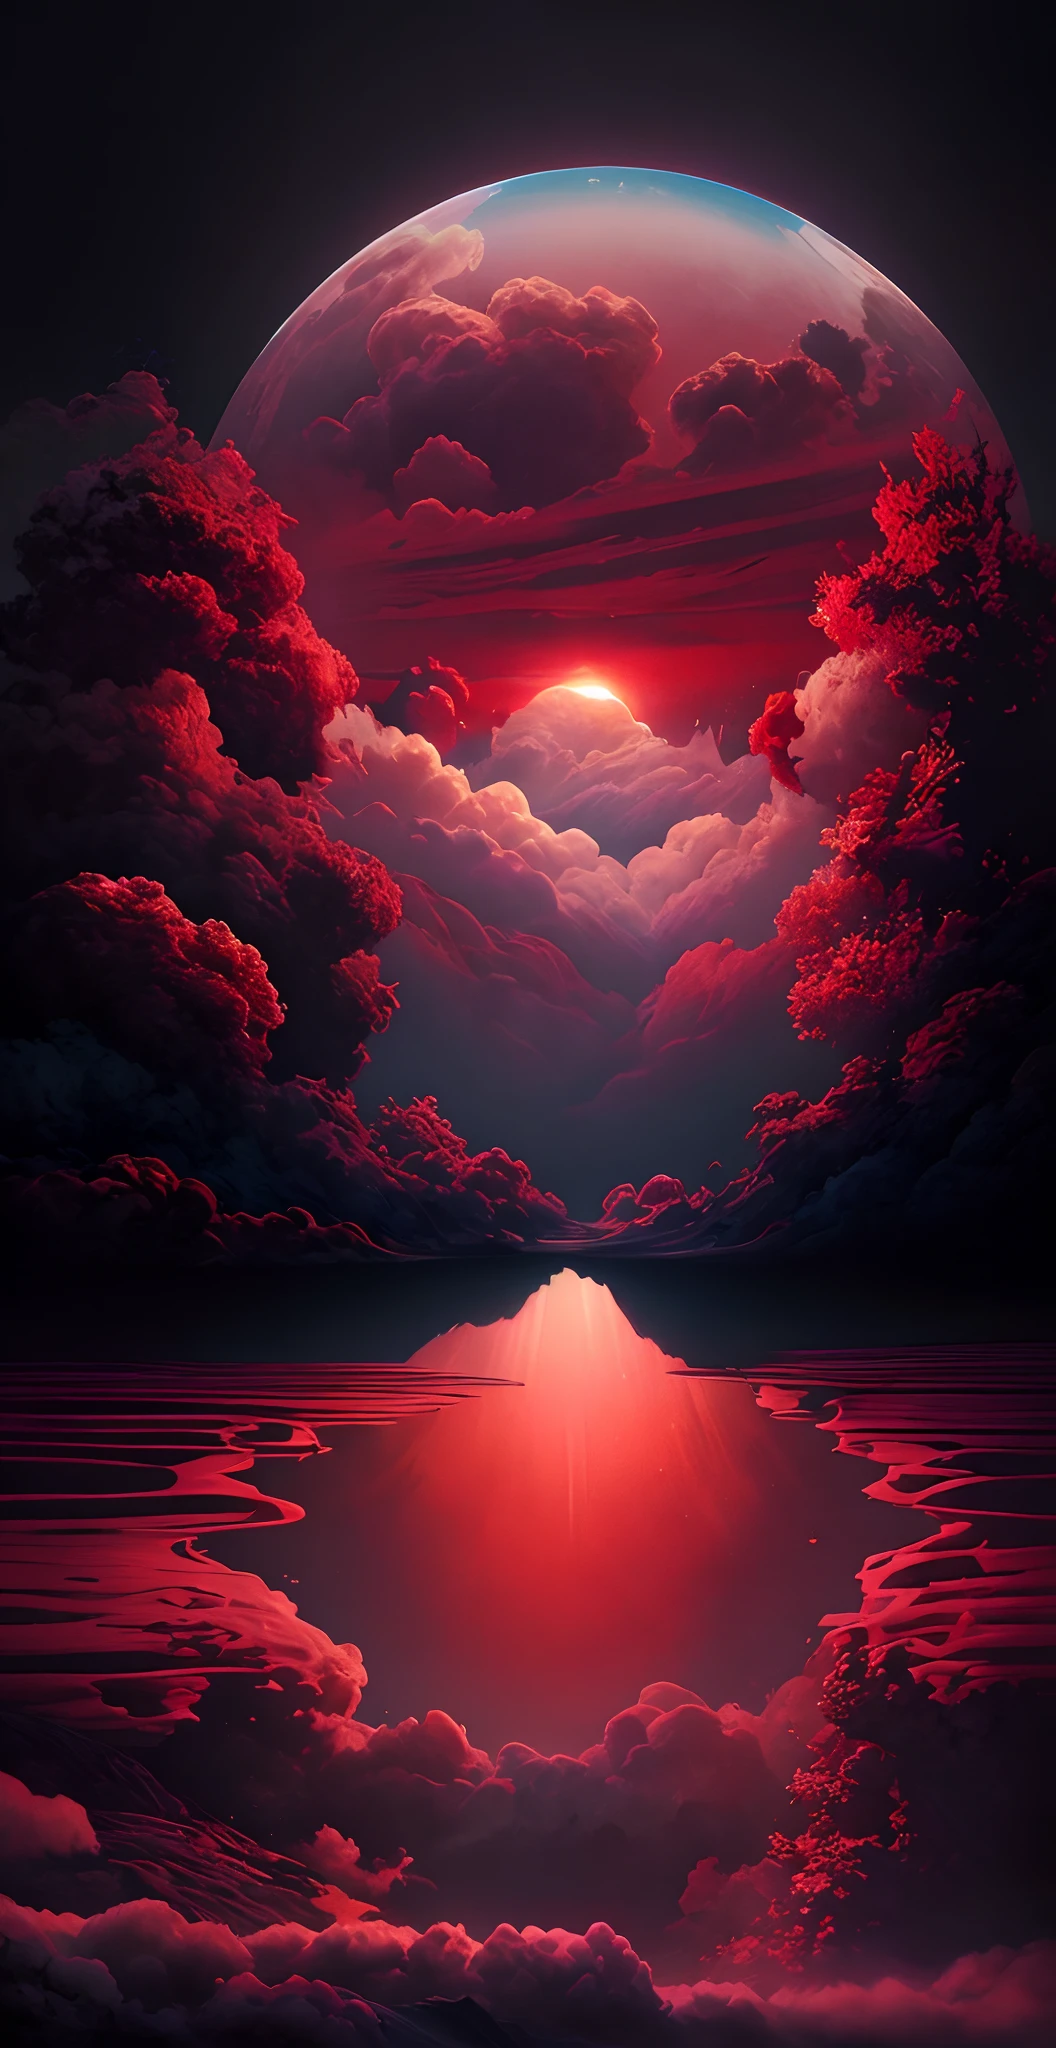 "Obra-prima surrealista. Qualidade excepcional. Detalhes surpreendentes. Surreal CG rendering of a dark red skull rising above a tranquil lake surrounded by red clouds, auto iluminado |, Large area of clouds and fog in luminous tones, celestial lighting, cosmic enlightenment, Experience the fusion of abstract and realistic elements. Cores vibrantes e contrastantes. Atmosfera misteriosa. Surrealist technique in the representation of objects and figures. Organic textures and shapes. Dreamlike inspiration. Amazing composition and perspective. Enter a surreal world full of surprises and emotions."